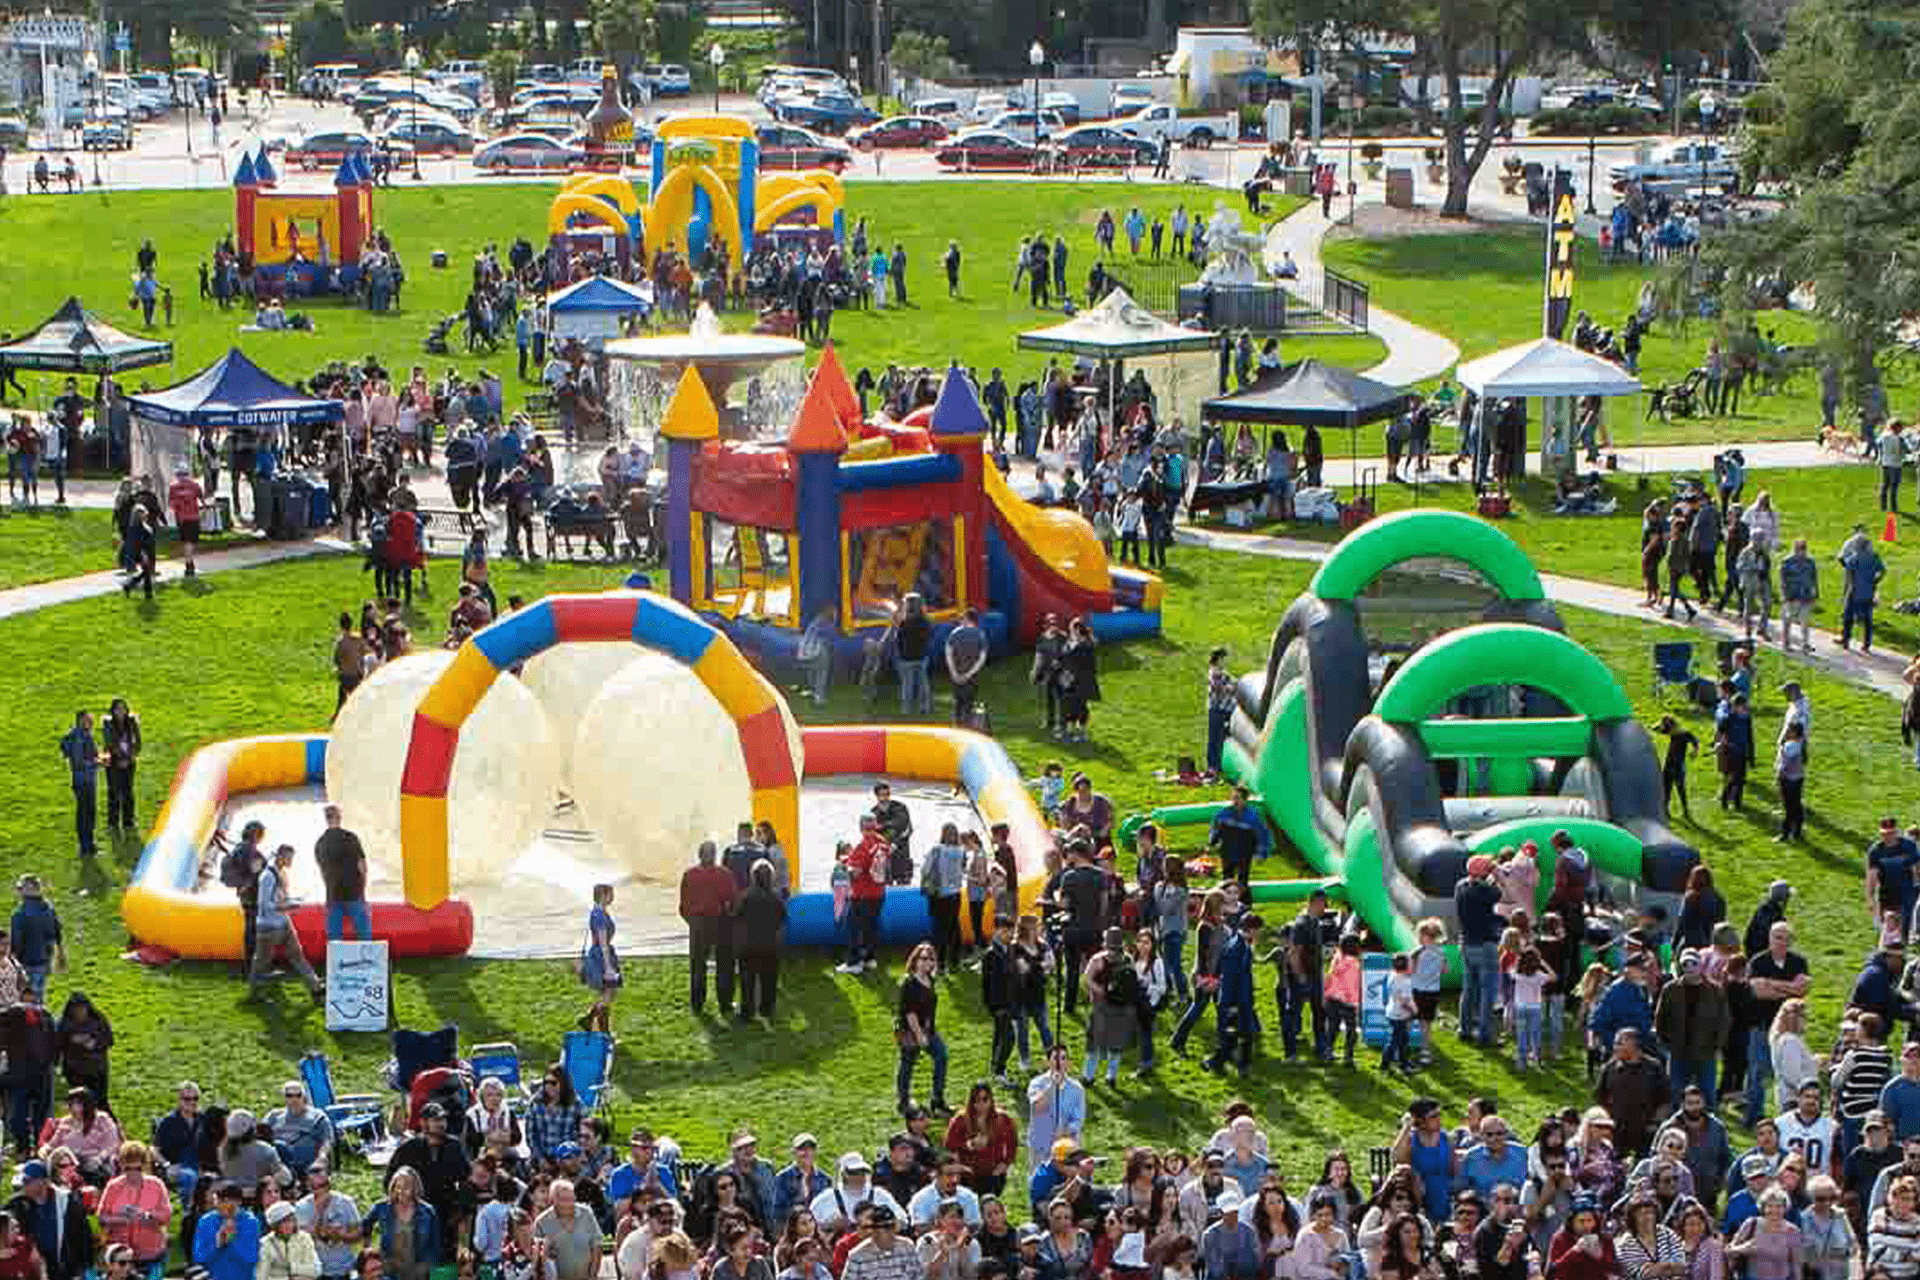 Image of blowup bounce houses and similar fun activities in Atascadero's Sunken Gardens during a past Tamale Festival.